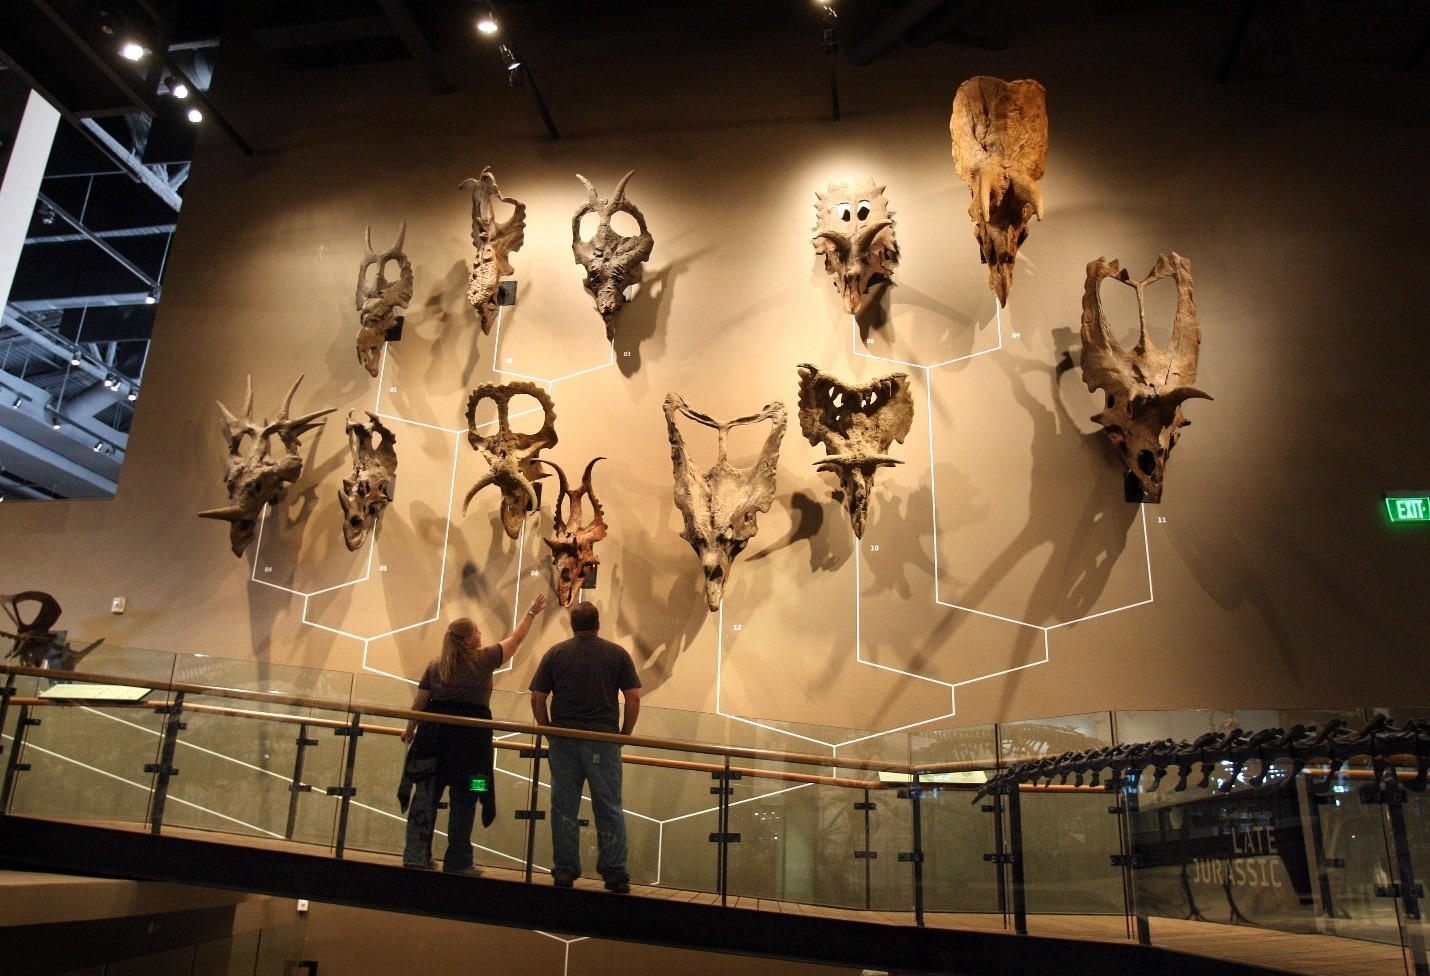 A wall display showing several different Triceratops skulls at the Natural History Museum of Utah.